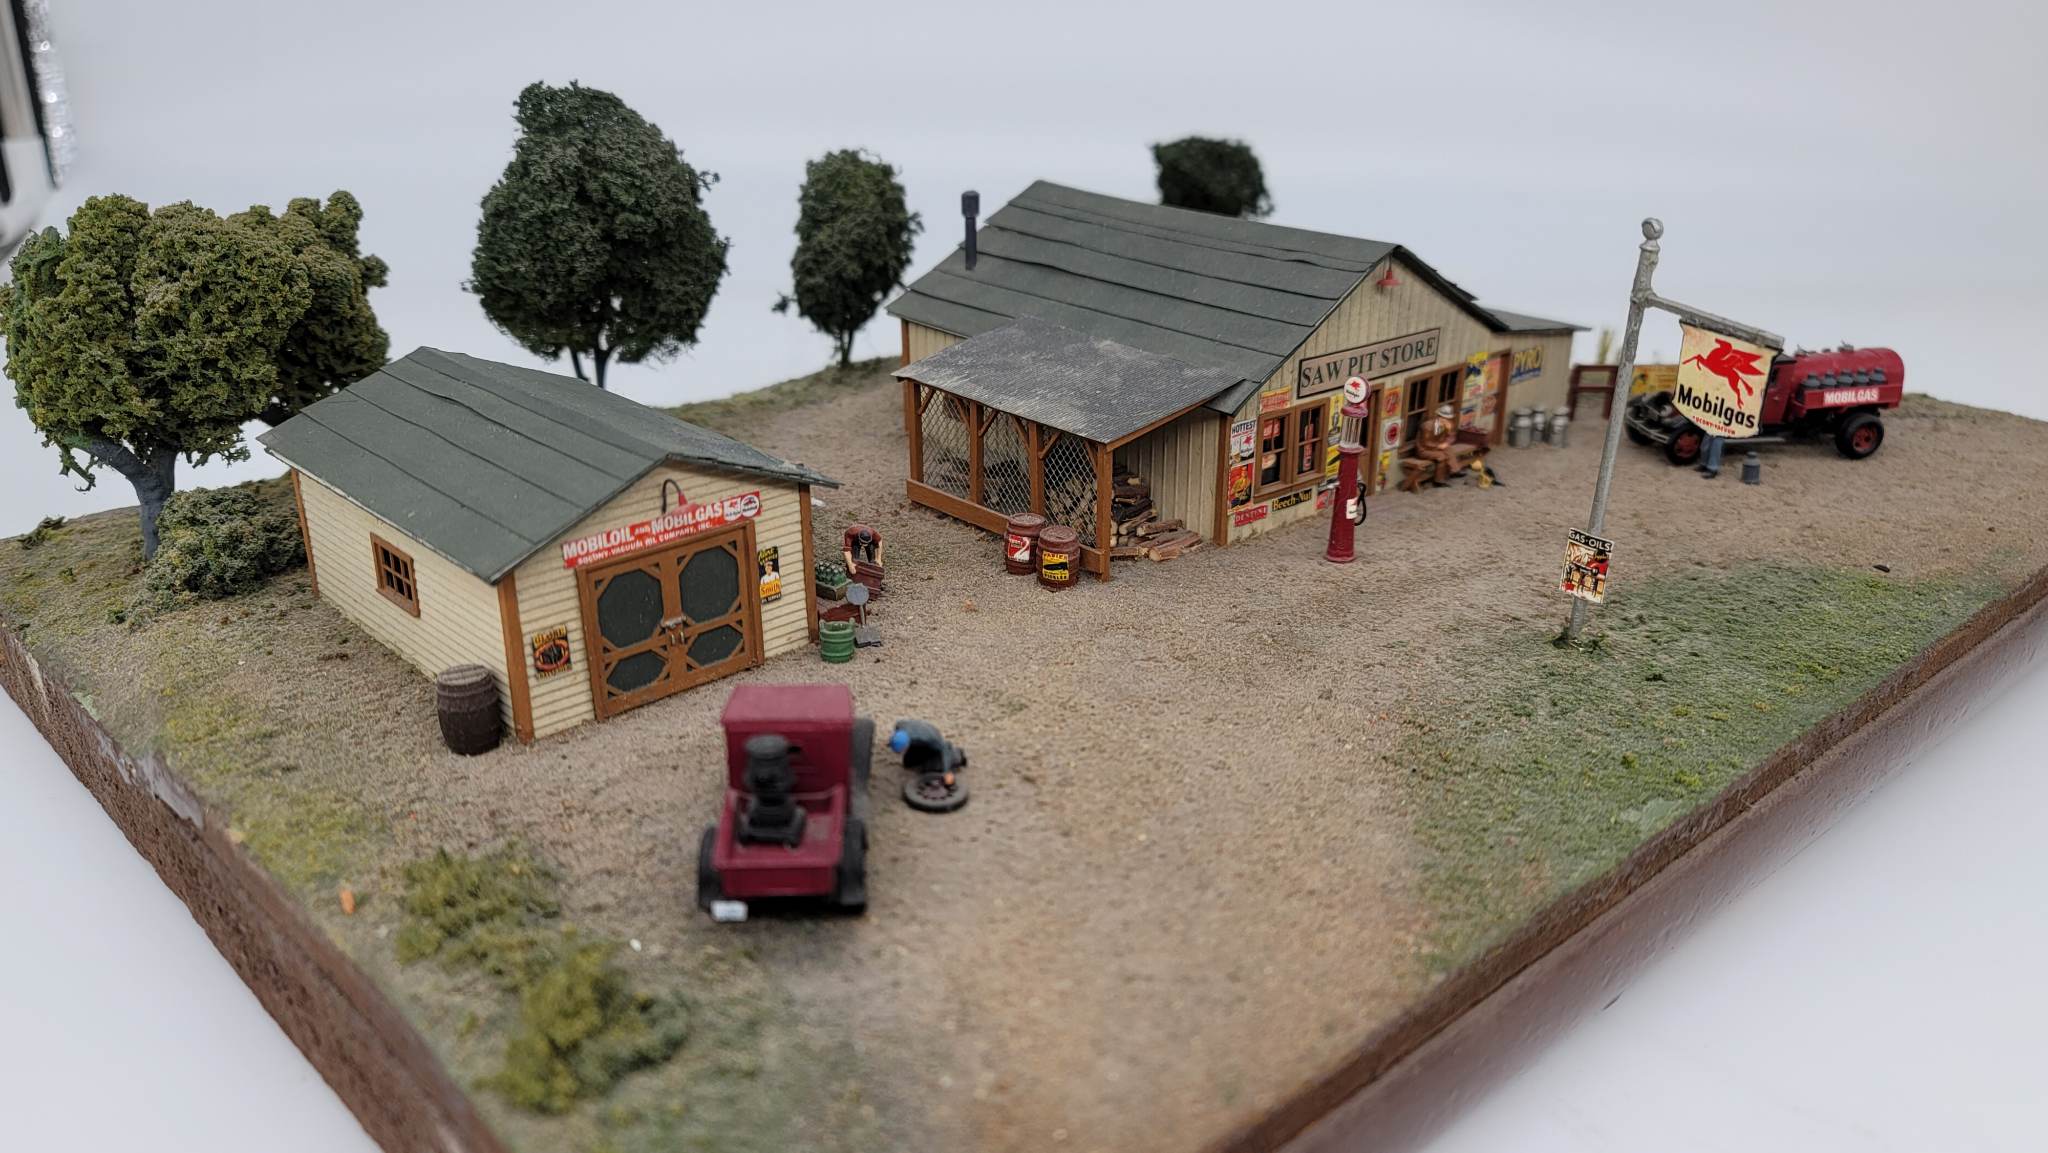 Saw Pit Store (HO Scale)